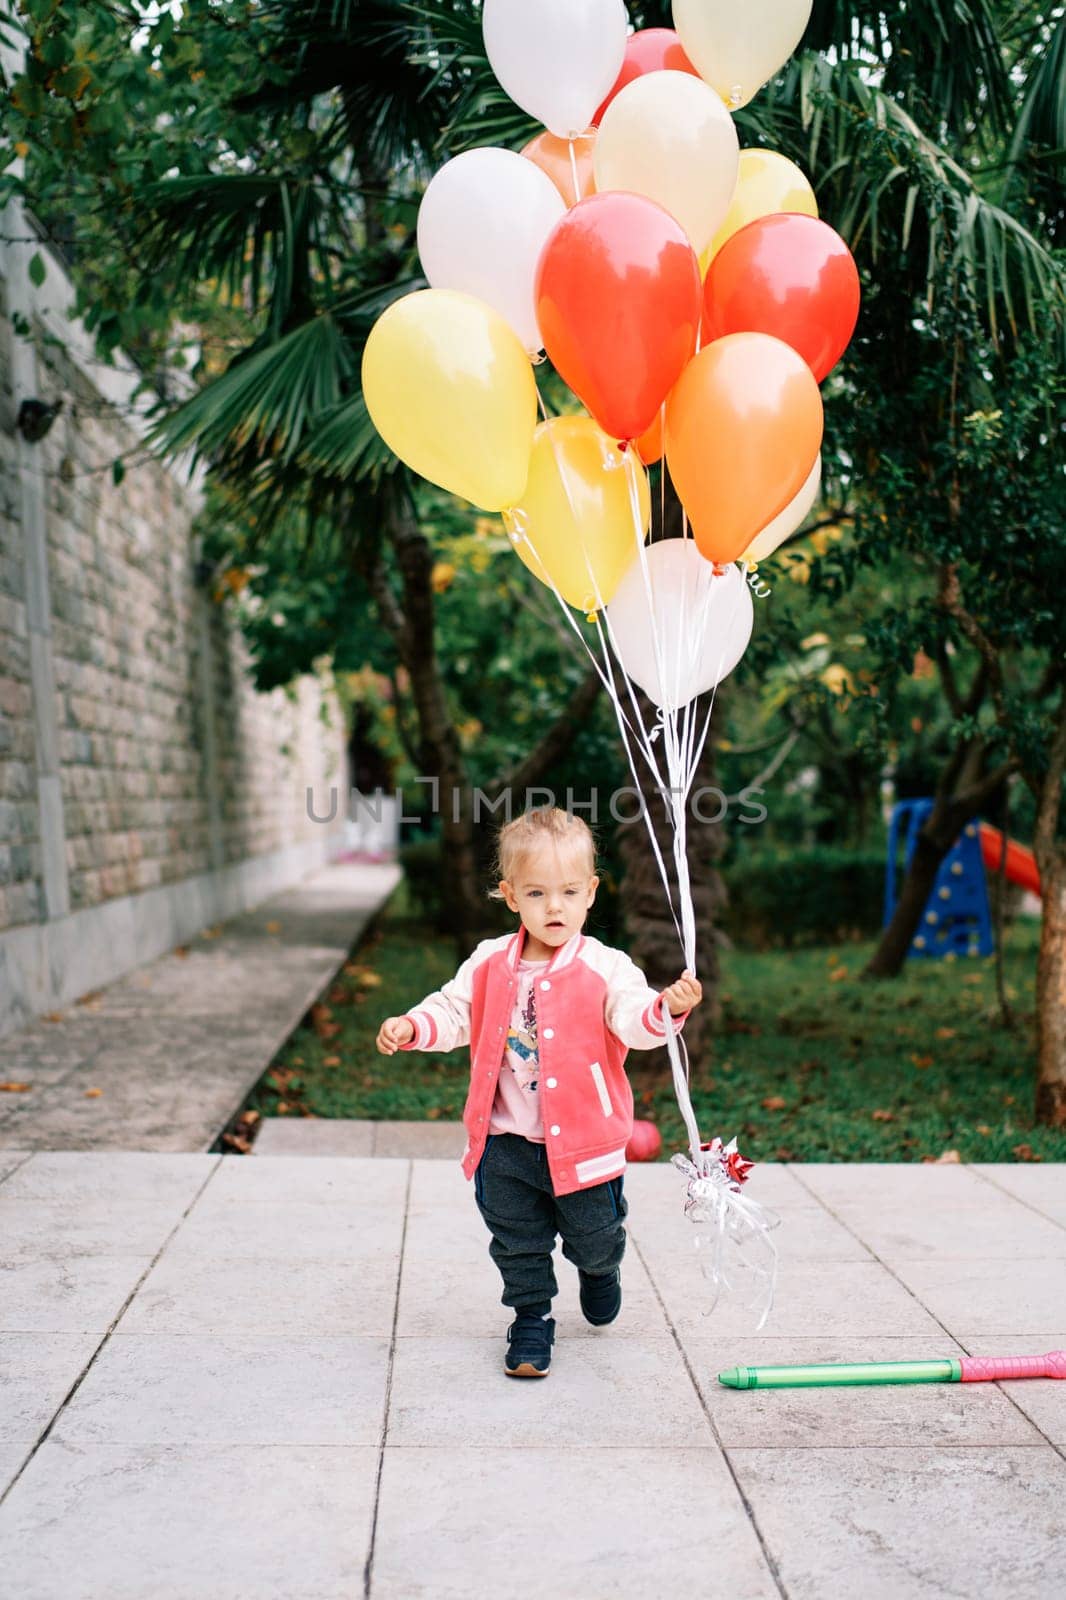 Little girl with a bunch of colorful balloons walks through a green garden by Nadtochiy